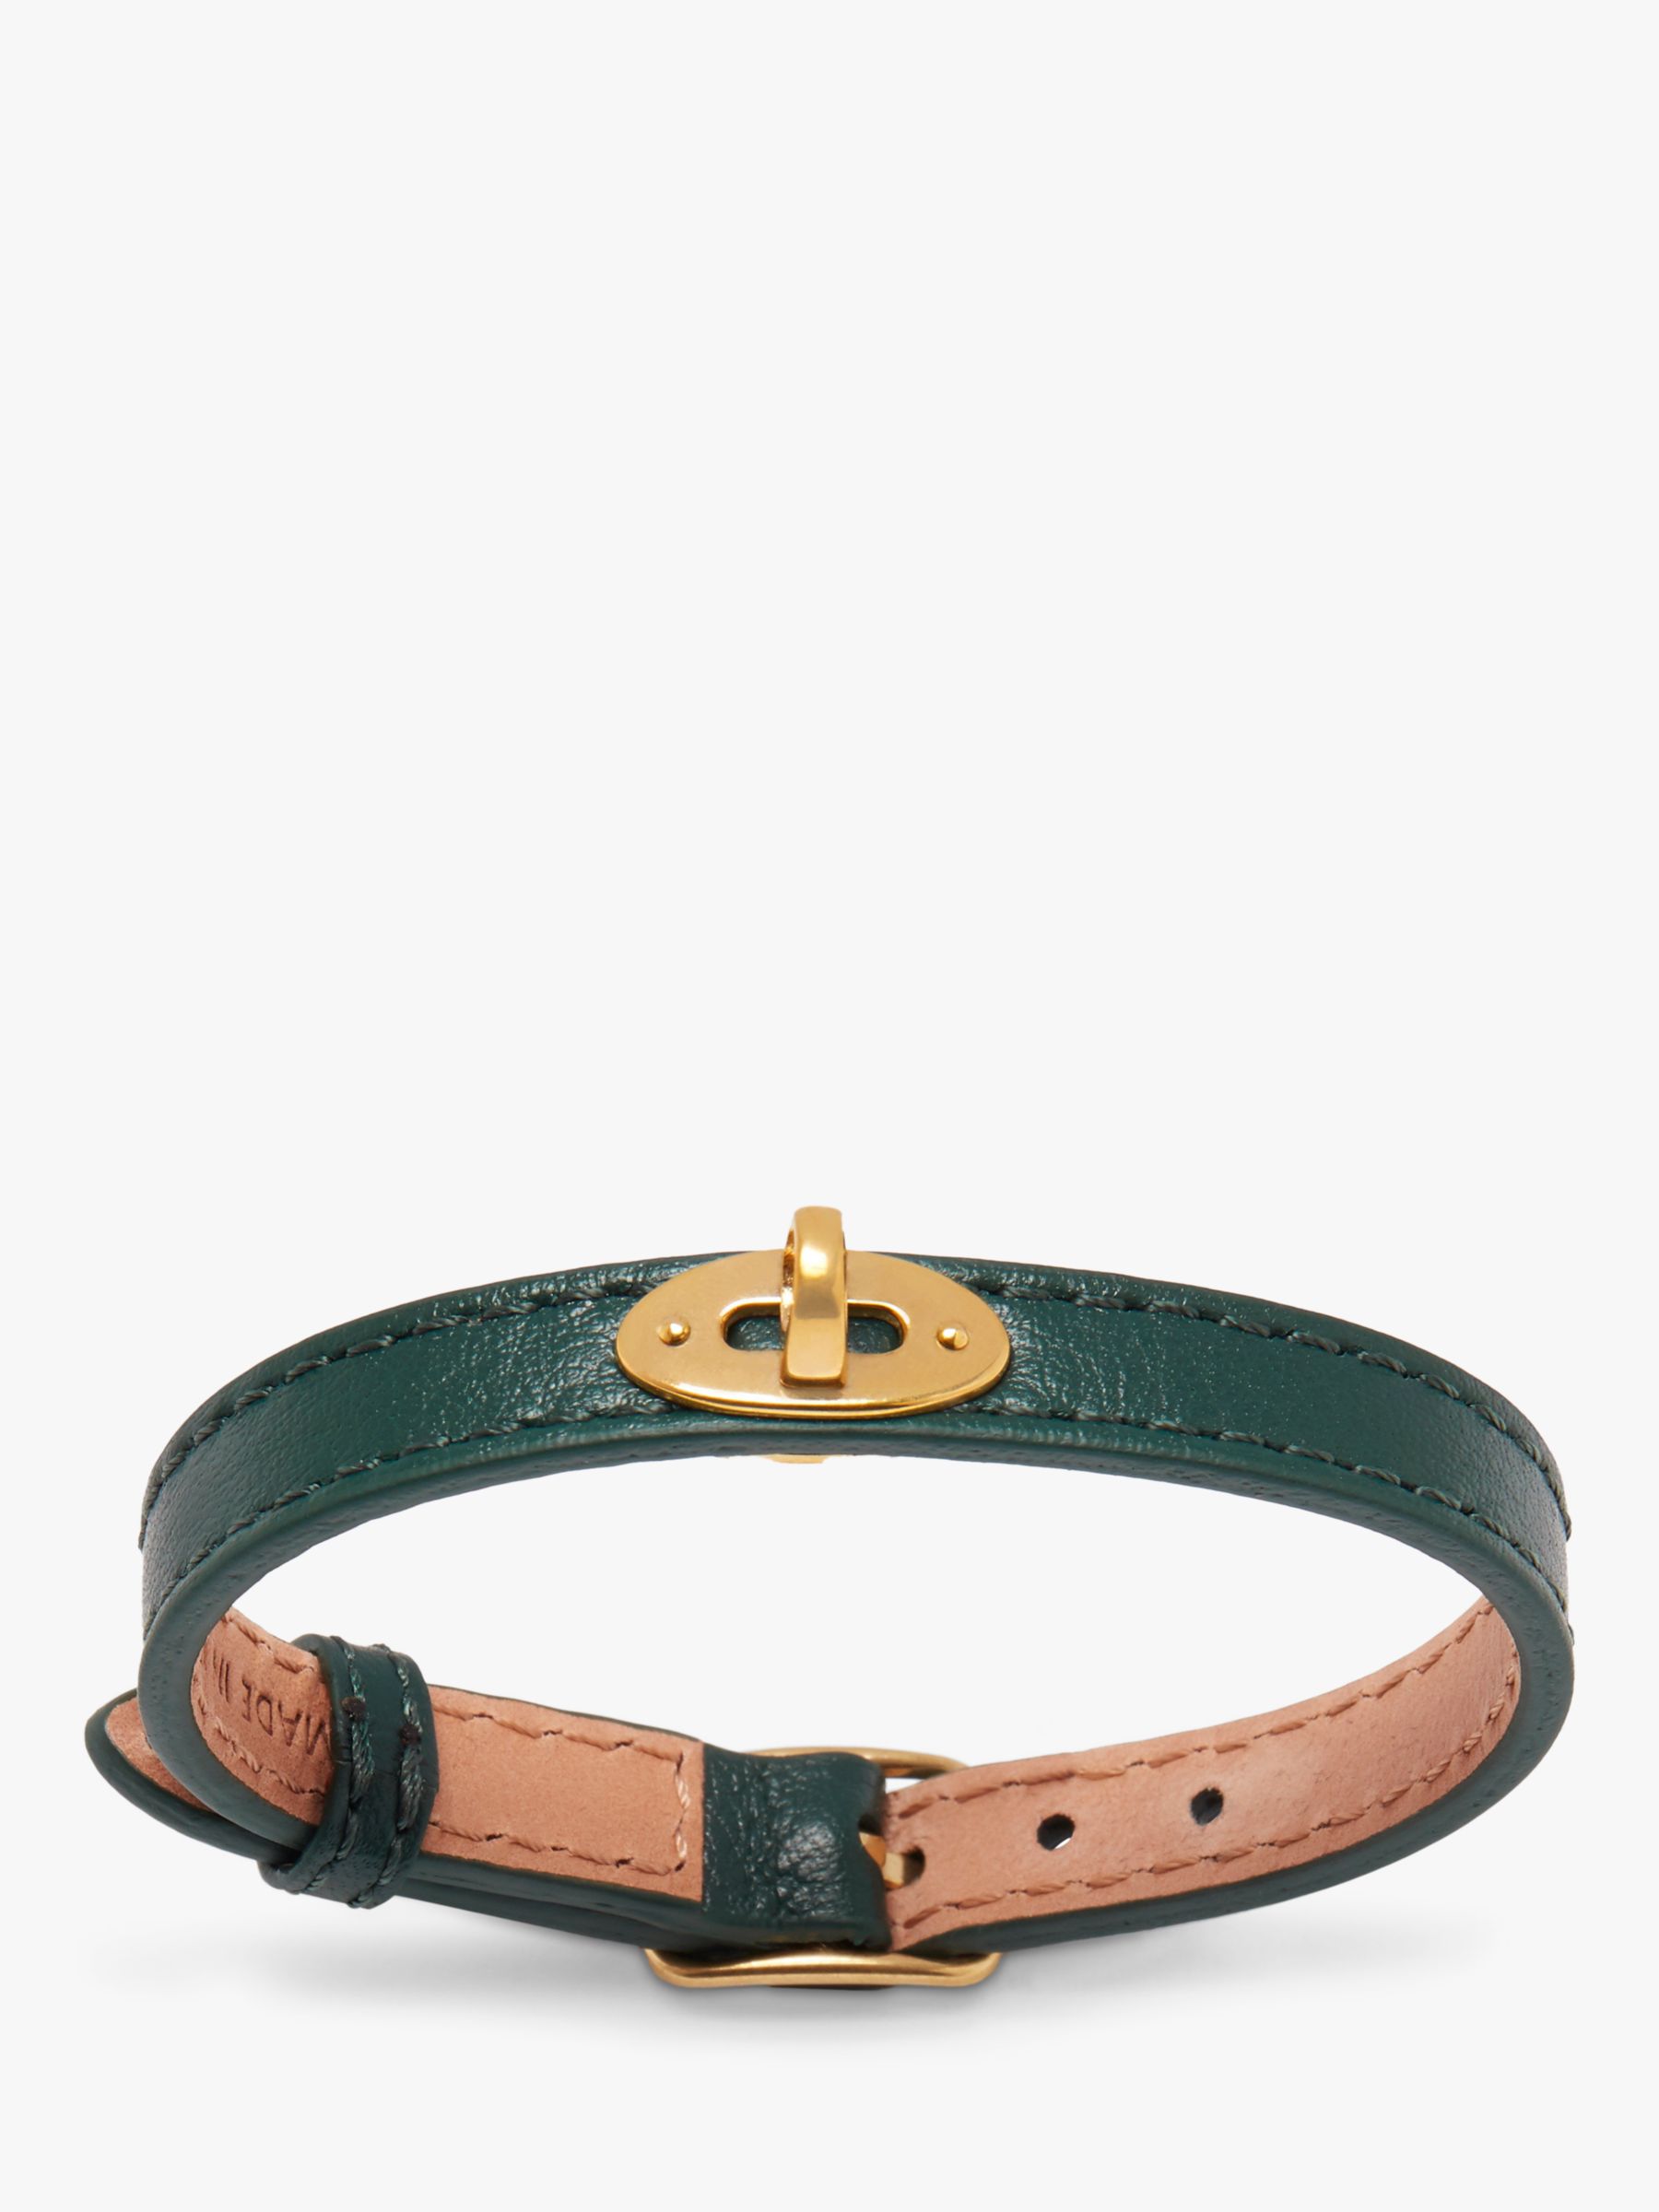 Mulberry Bayswater Small Classic Grain Leather Thin Bracelet, Mulberry